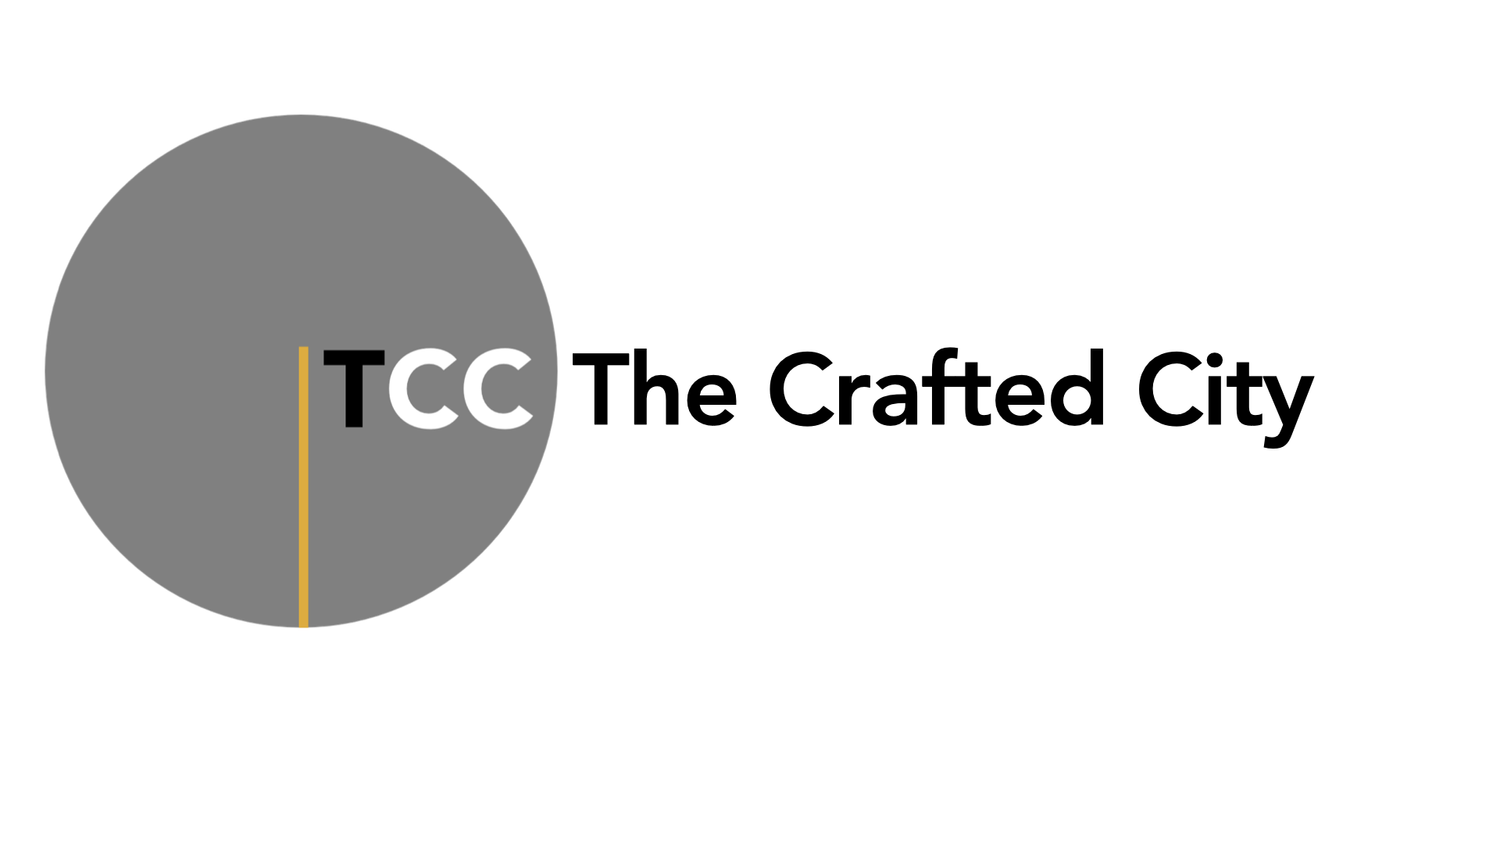 The Crafted City